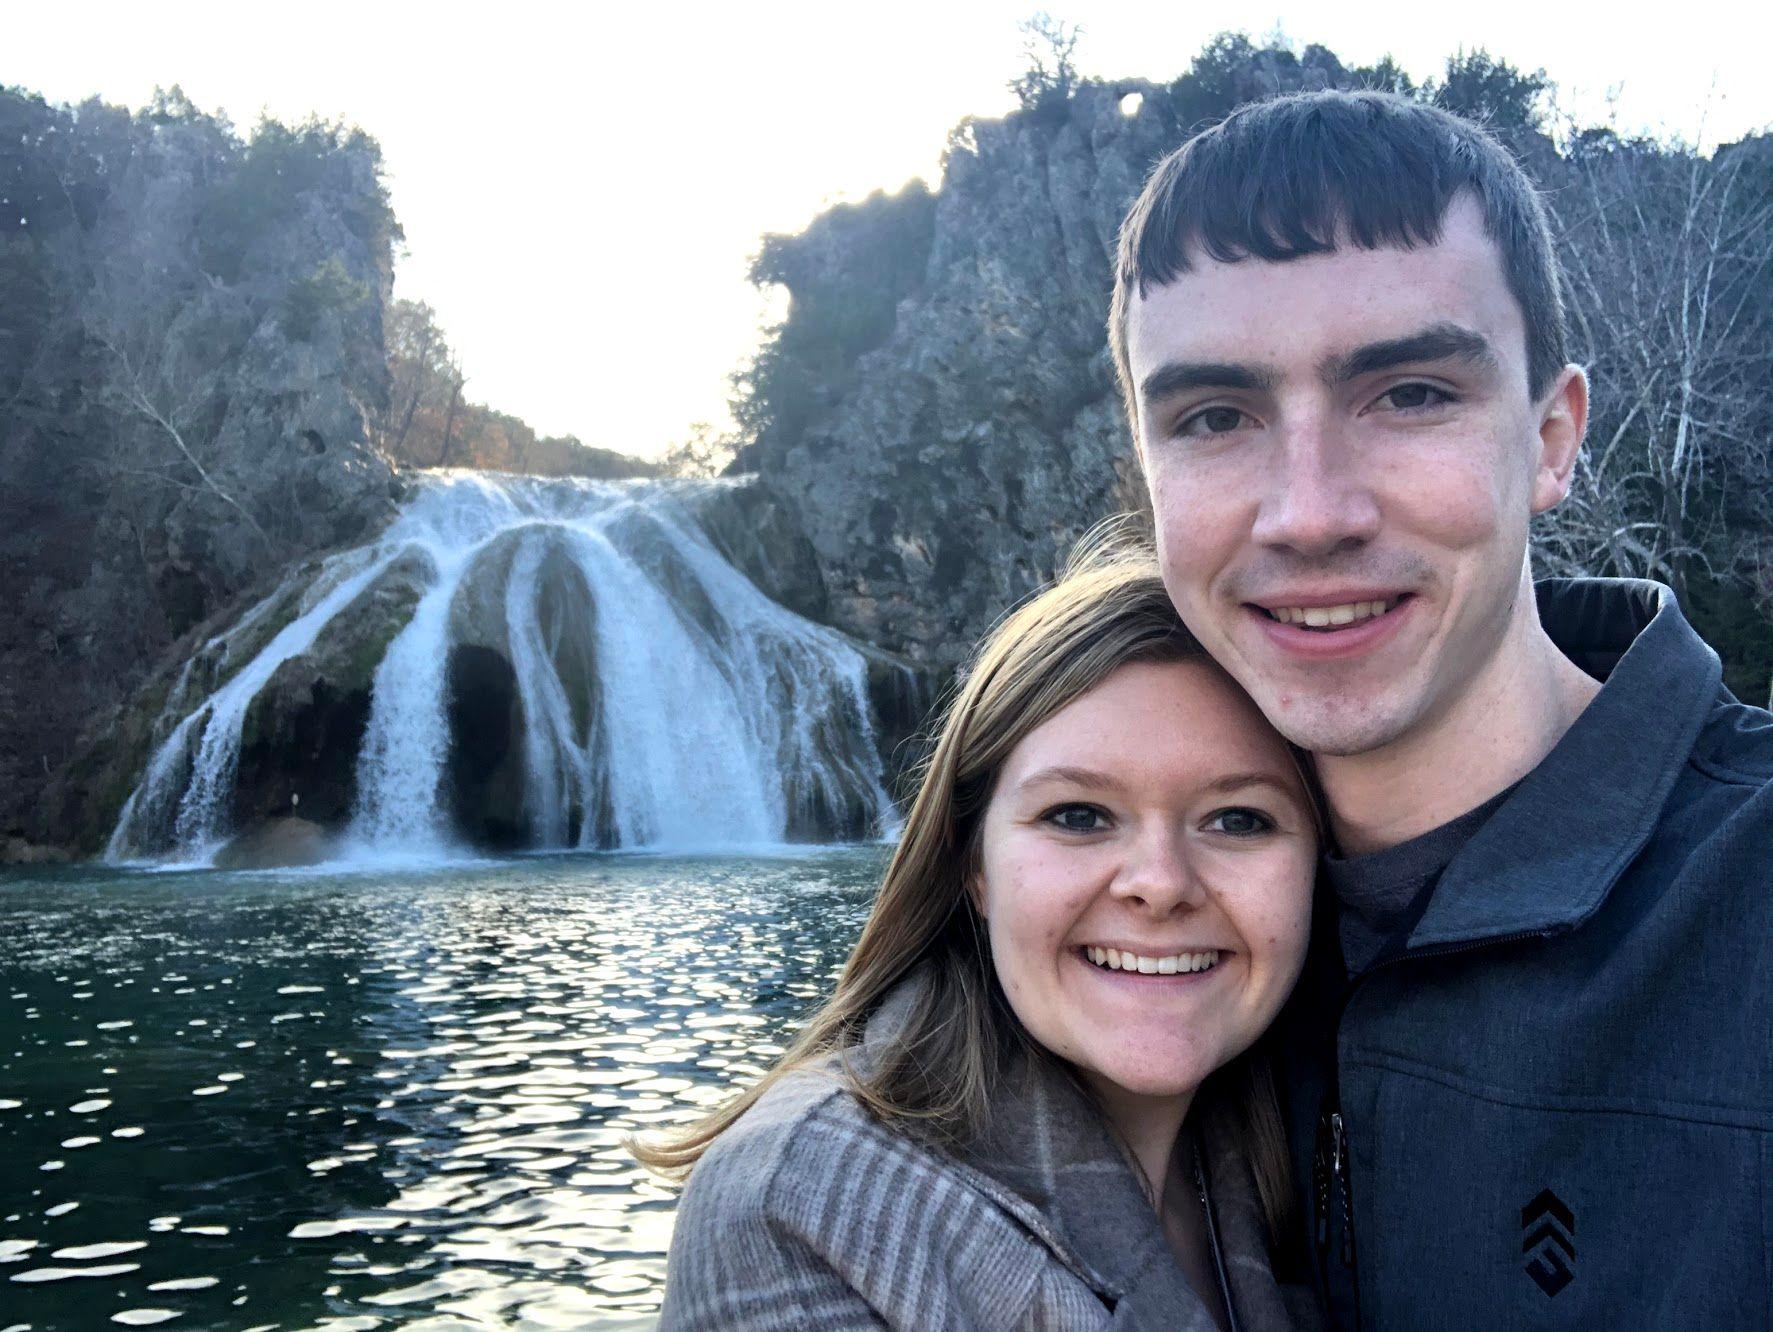 A selfie of Lydia and Joe in front of Turner Falls.